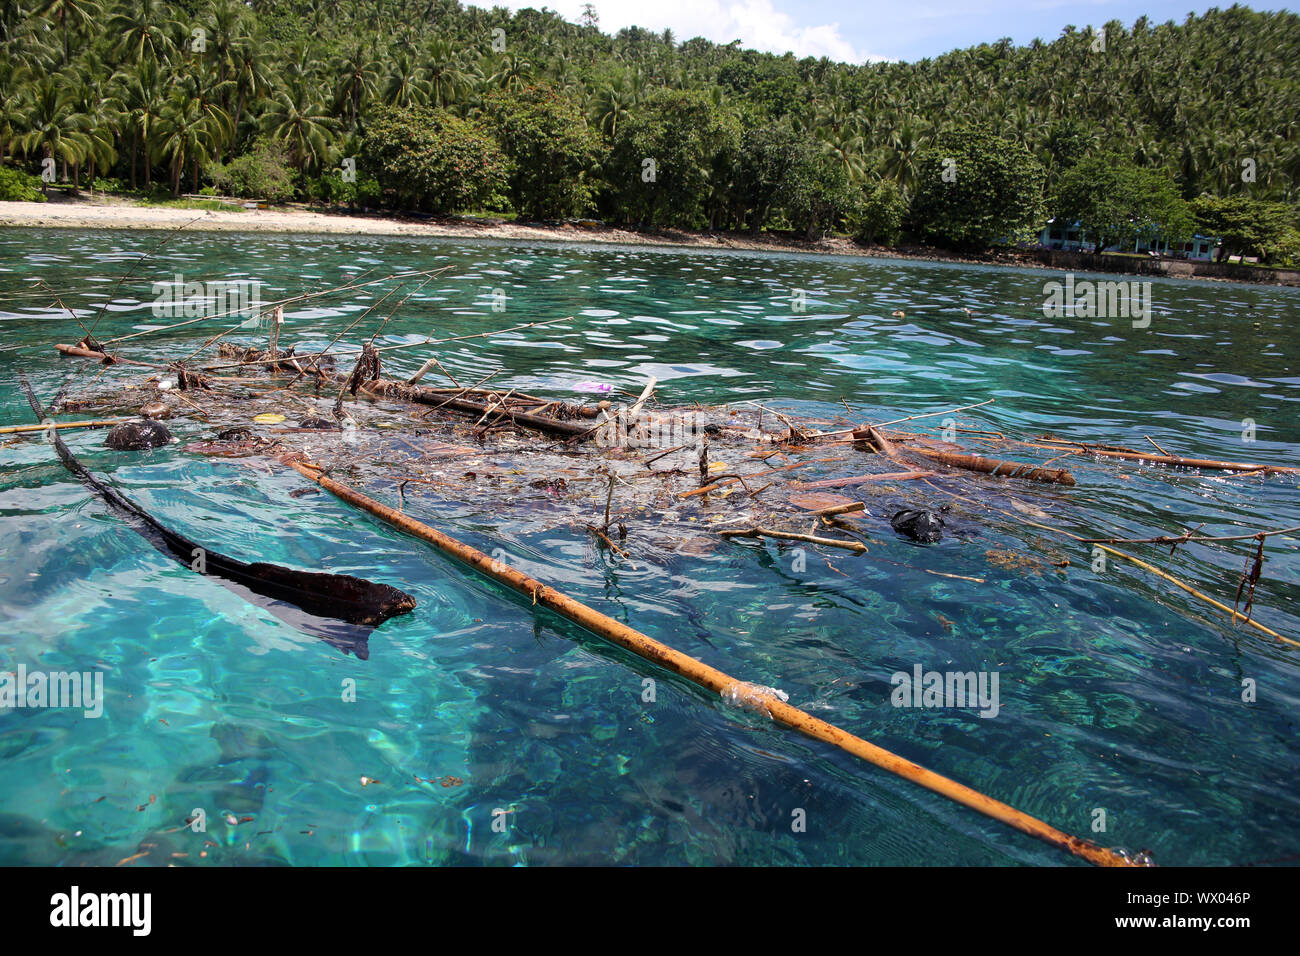 Flotsam collects in a bay off the coast of Panaon Island Stock Photo